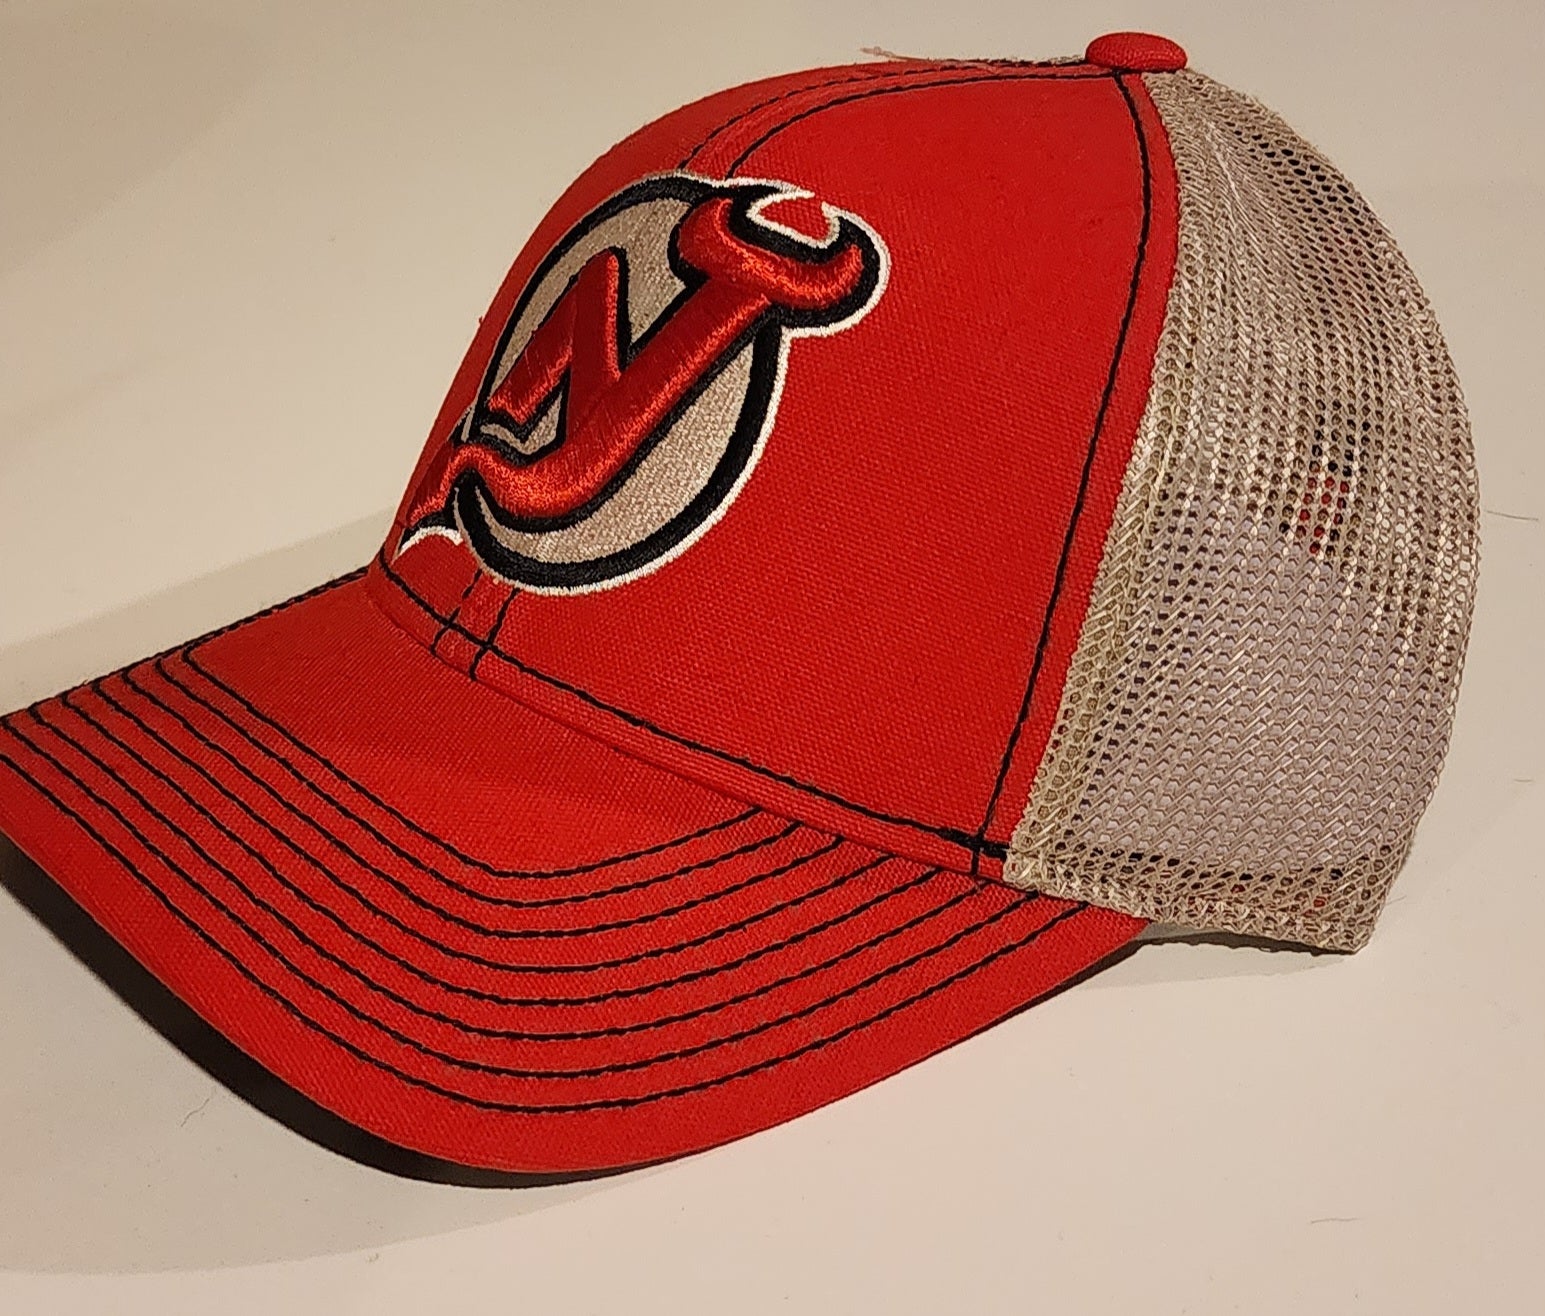 New Jersey Devils 2003 Stanley Cup Champions Hat Cap One Size Fits All